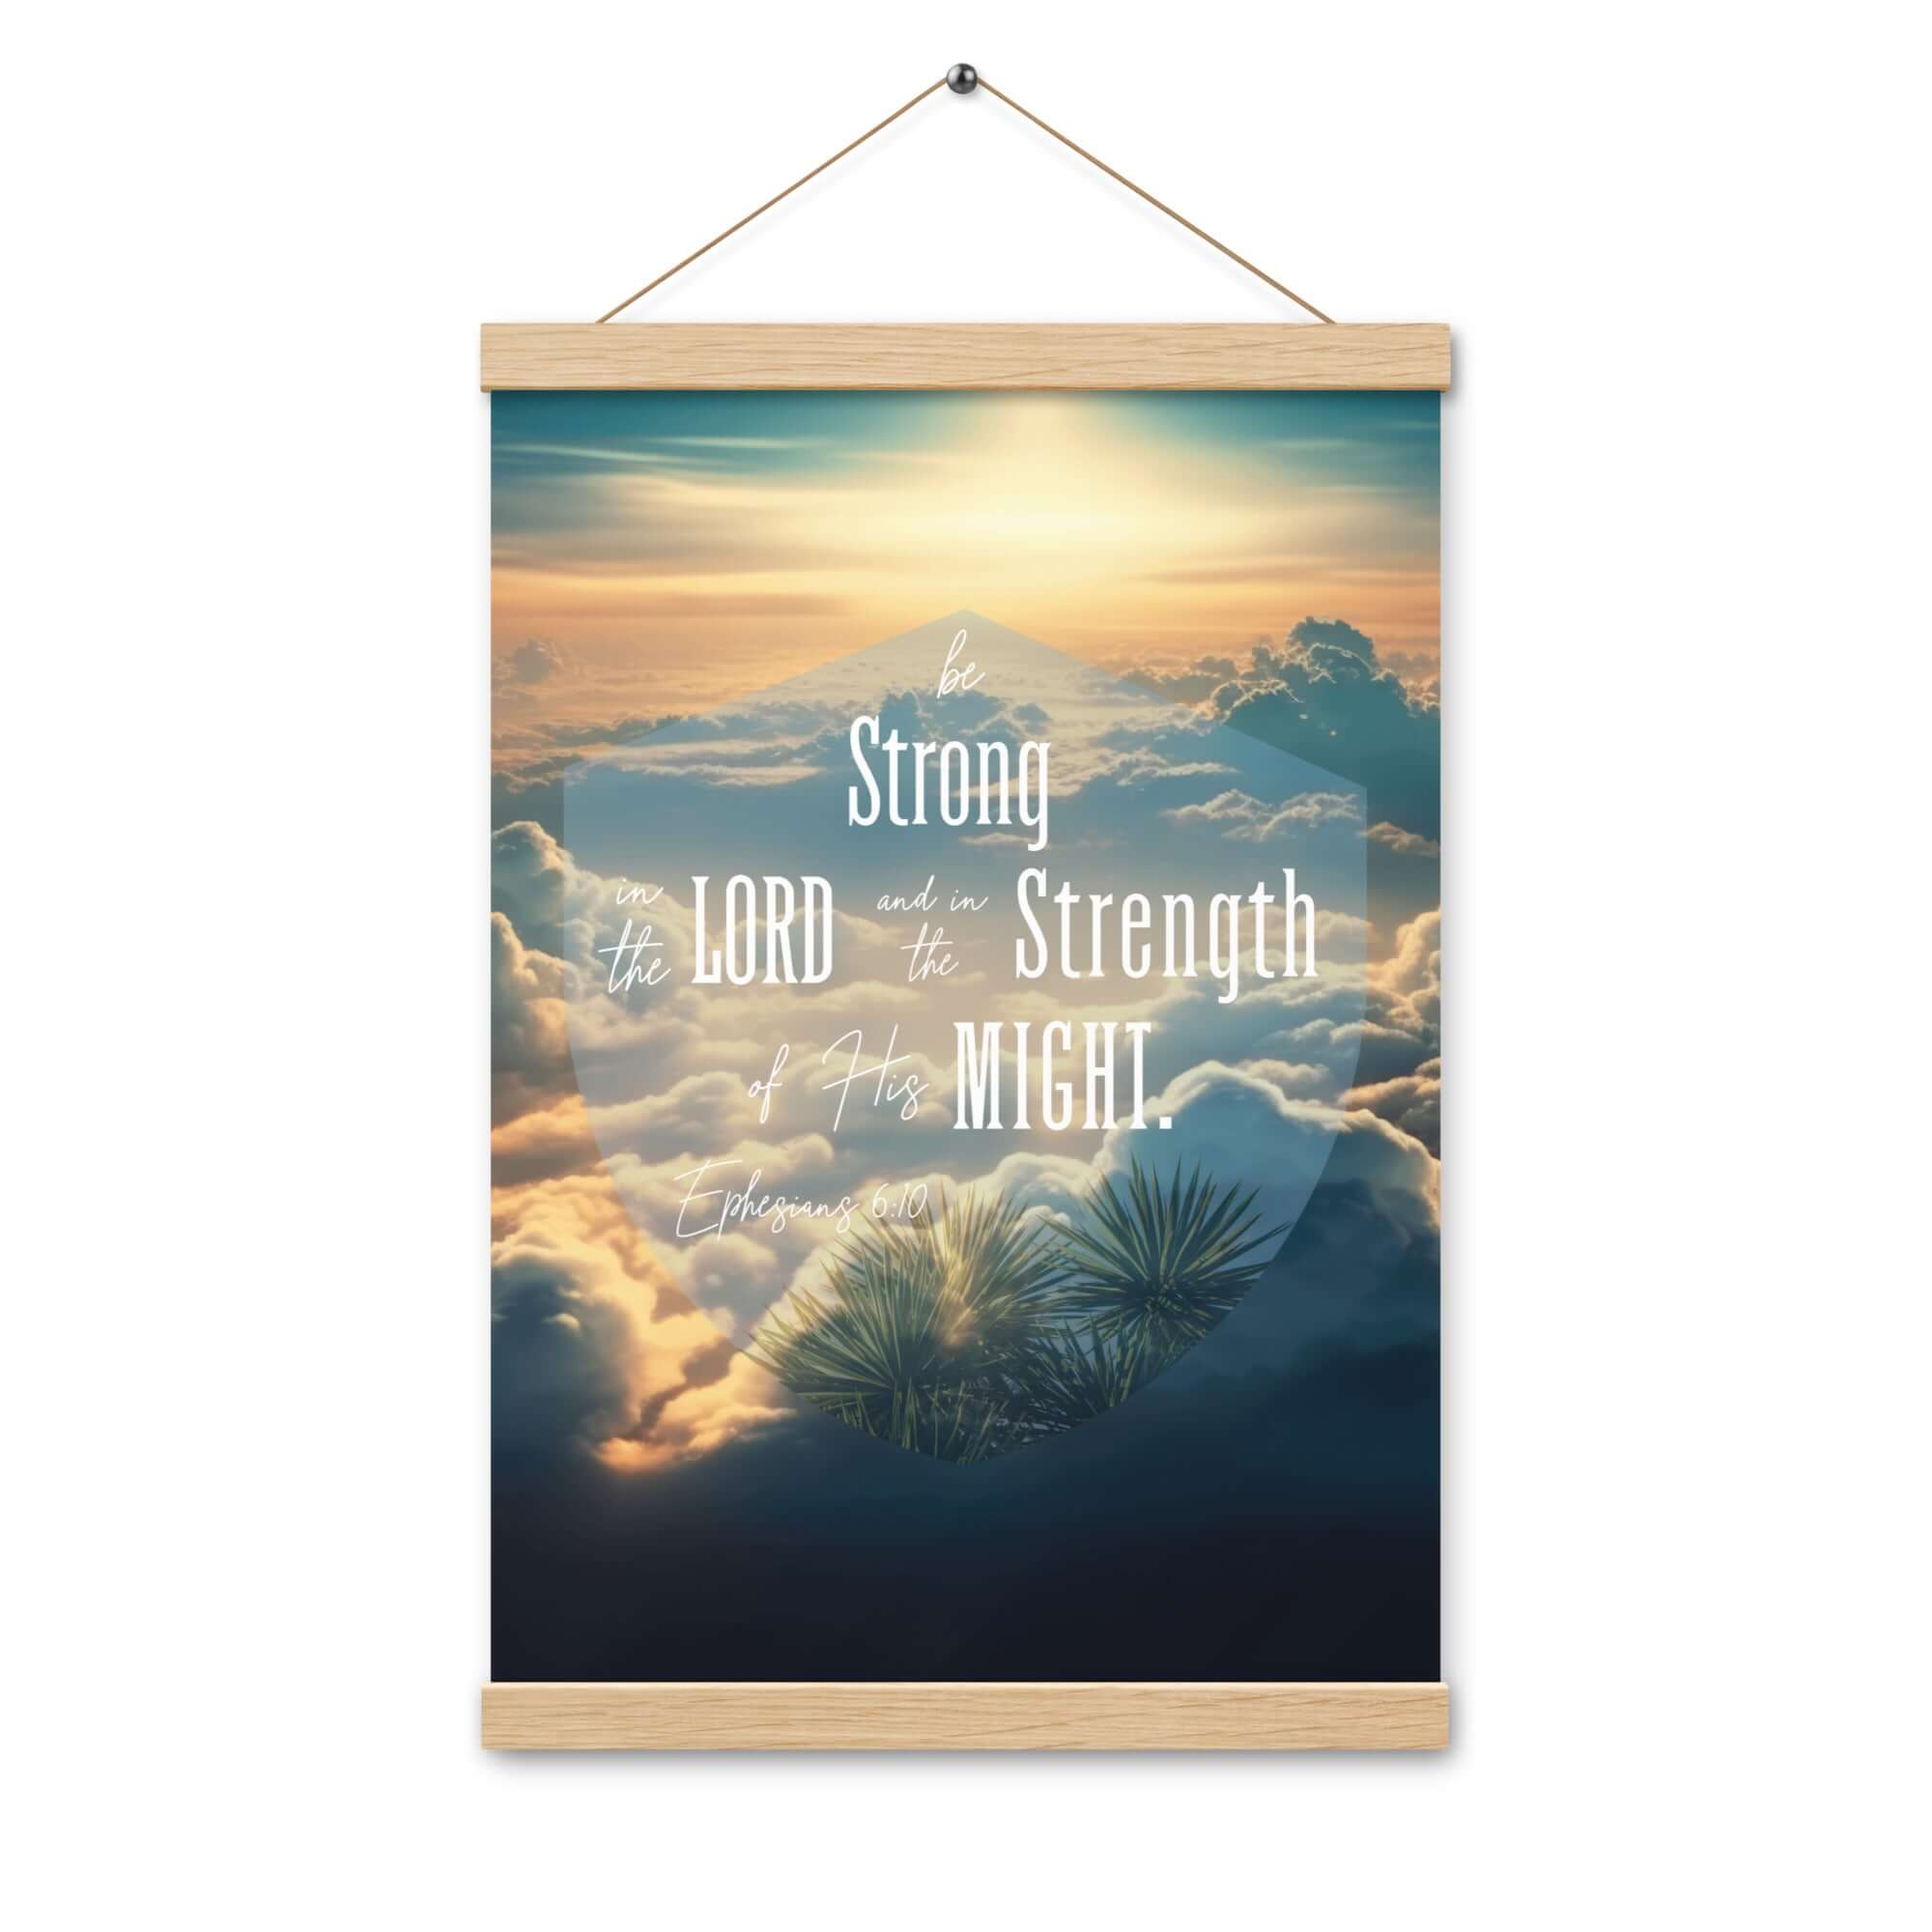 Eph. 6:10 - be strong in the Lord Hanger Poster